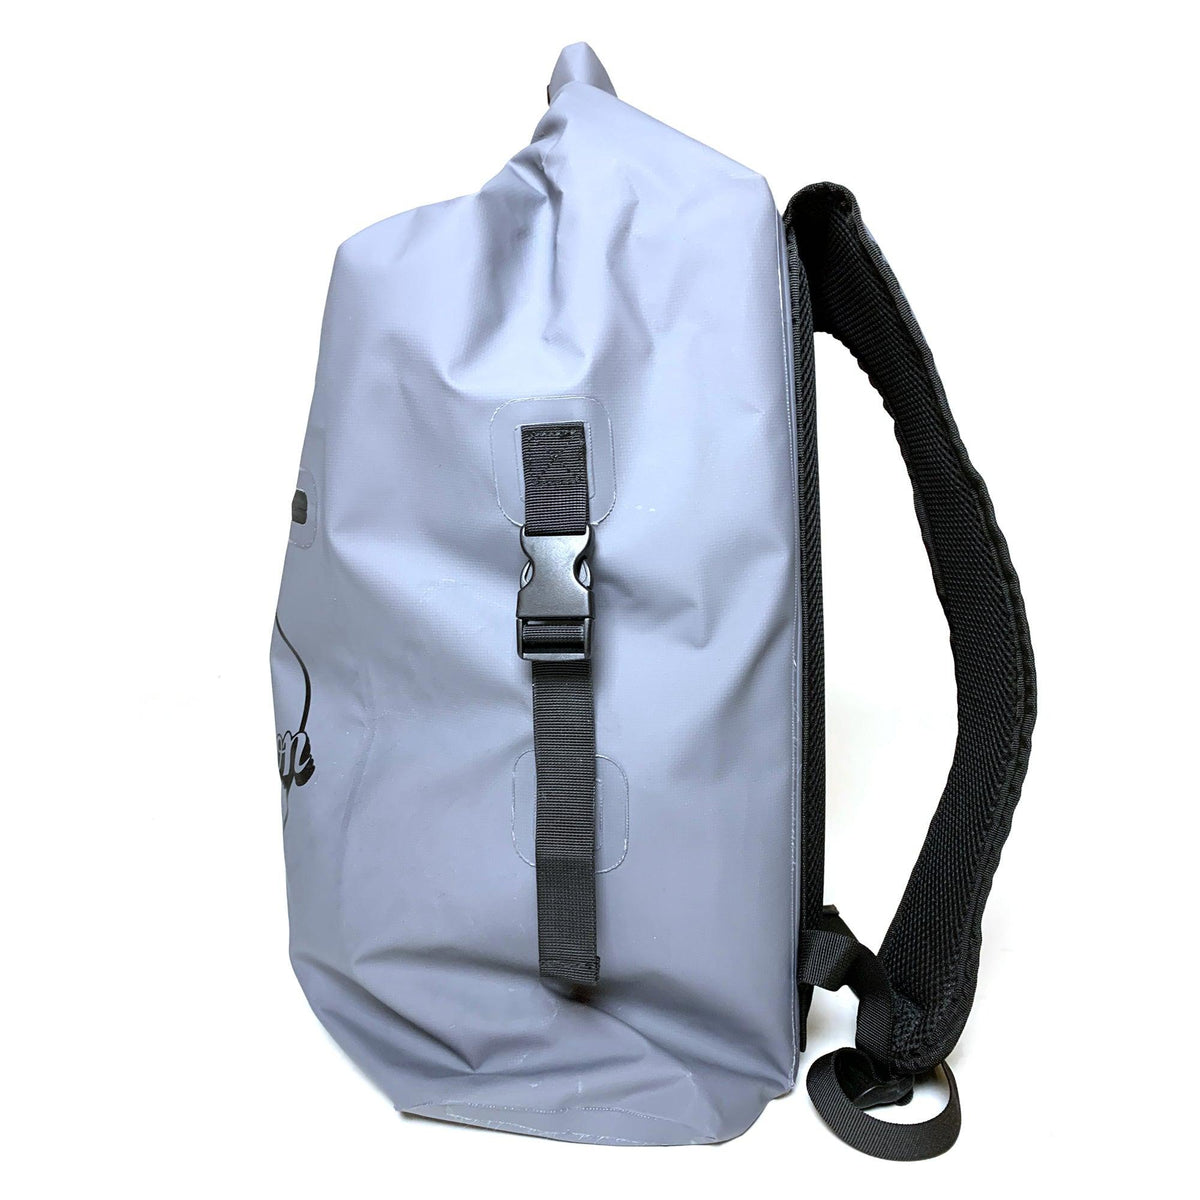 Limited Edition Water Proof Dry Backpack 40L - Funkshen Bodyboards